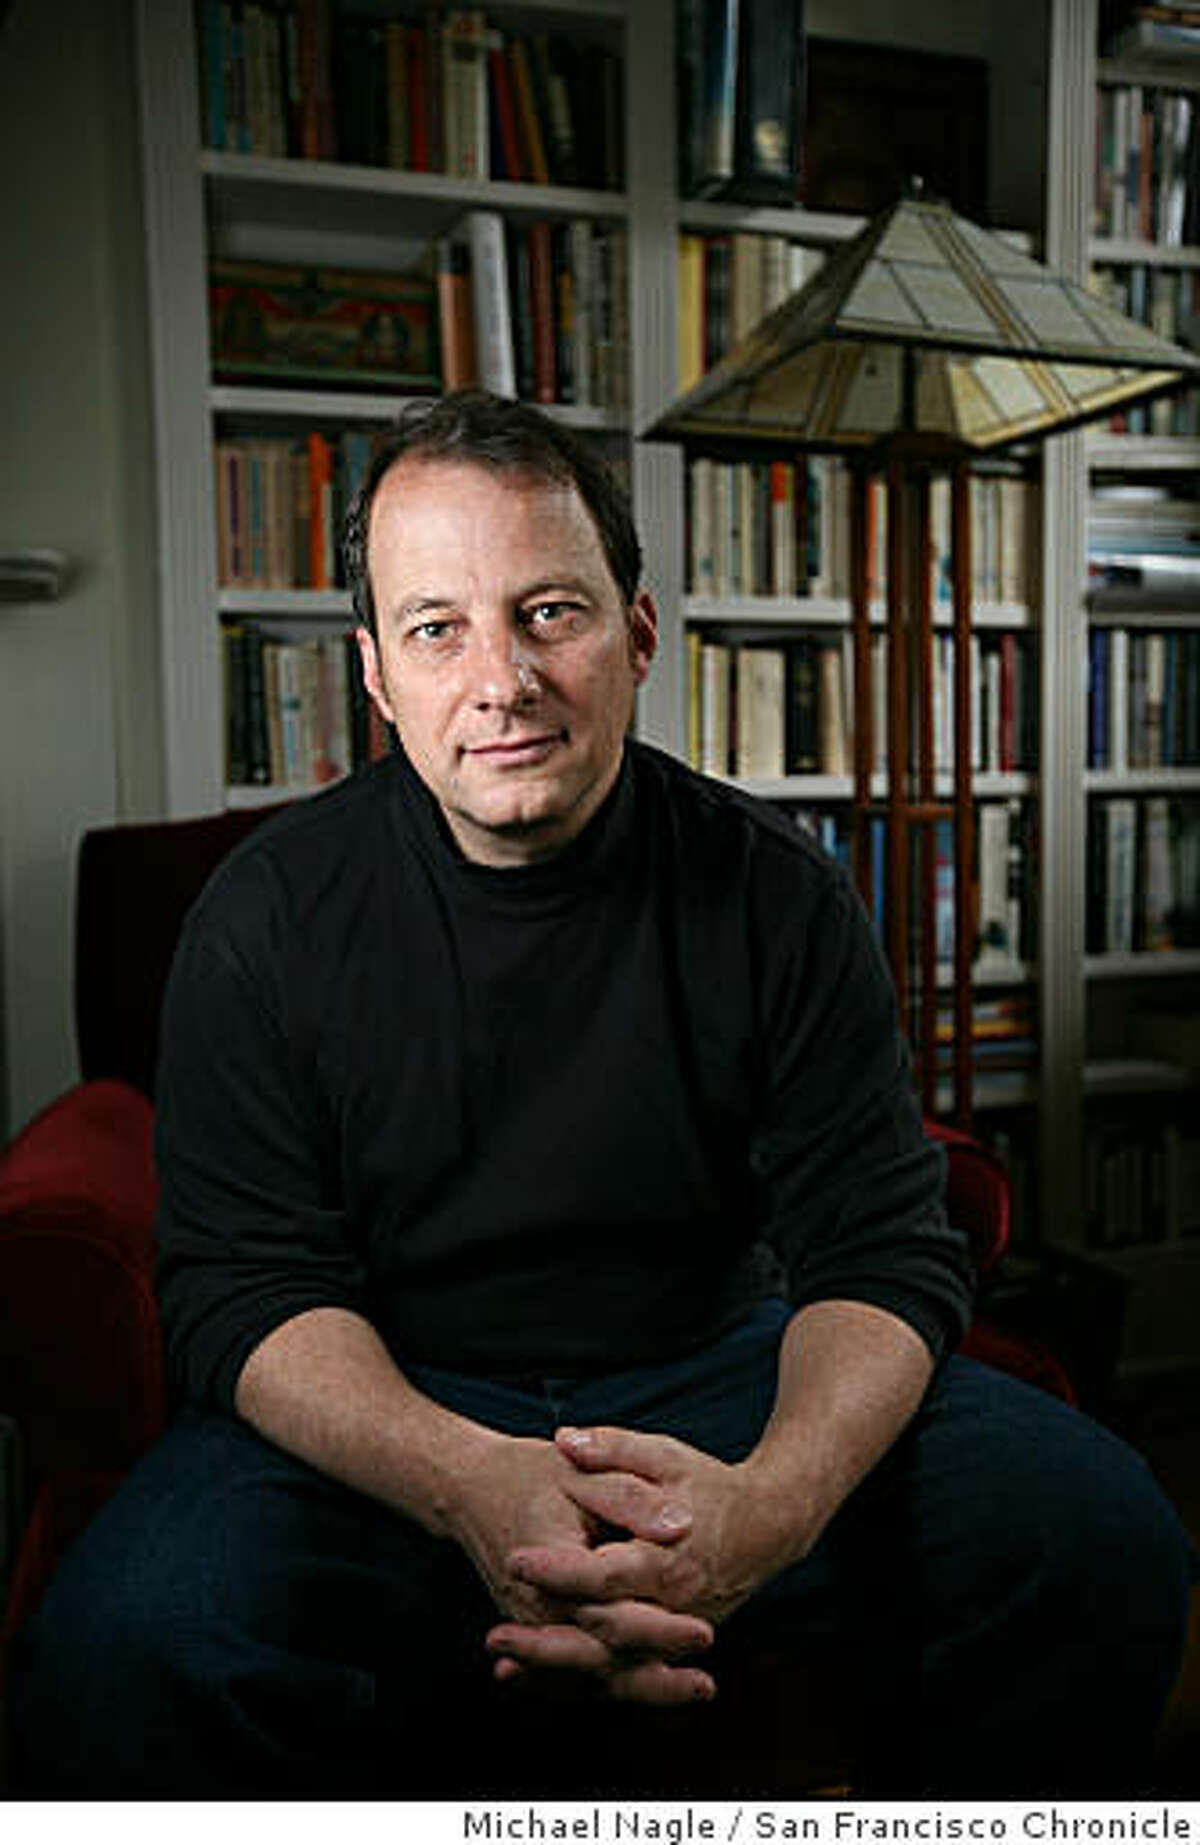 BROOKLYN, NY - MAY 09, 2008: Journalist and novelist George Packer poses in his Prospect Heights apartment on May 09, 2008 in Brooklyn, NY. For Packer, a staff writer for the New Yorker, writing runs in the family.